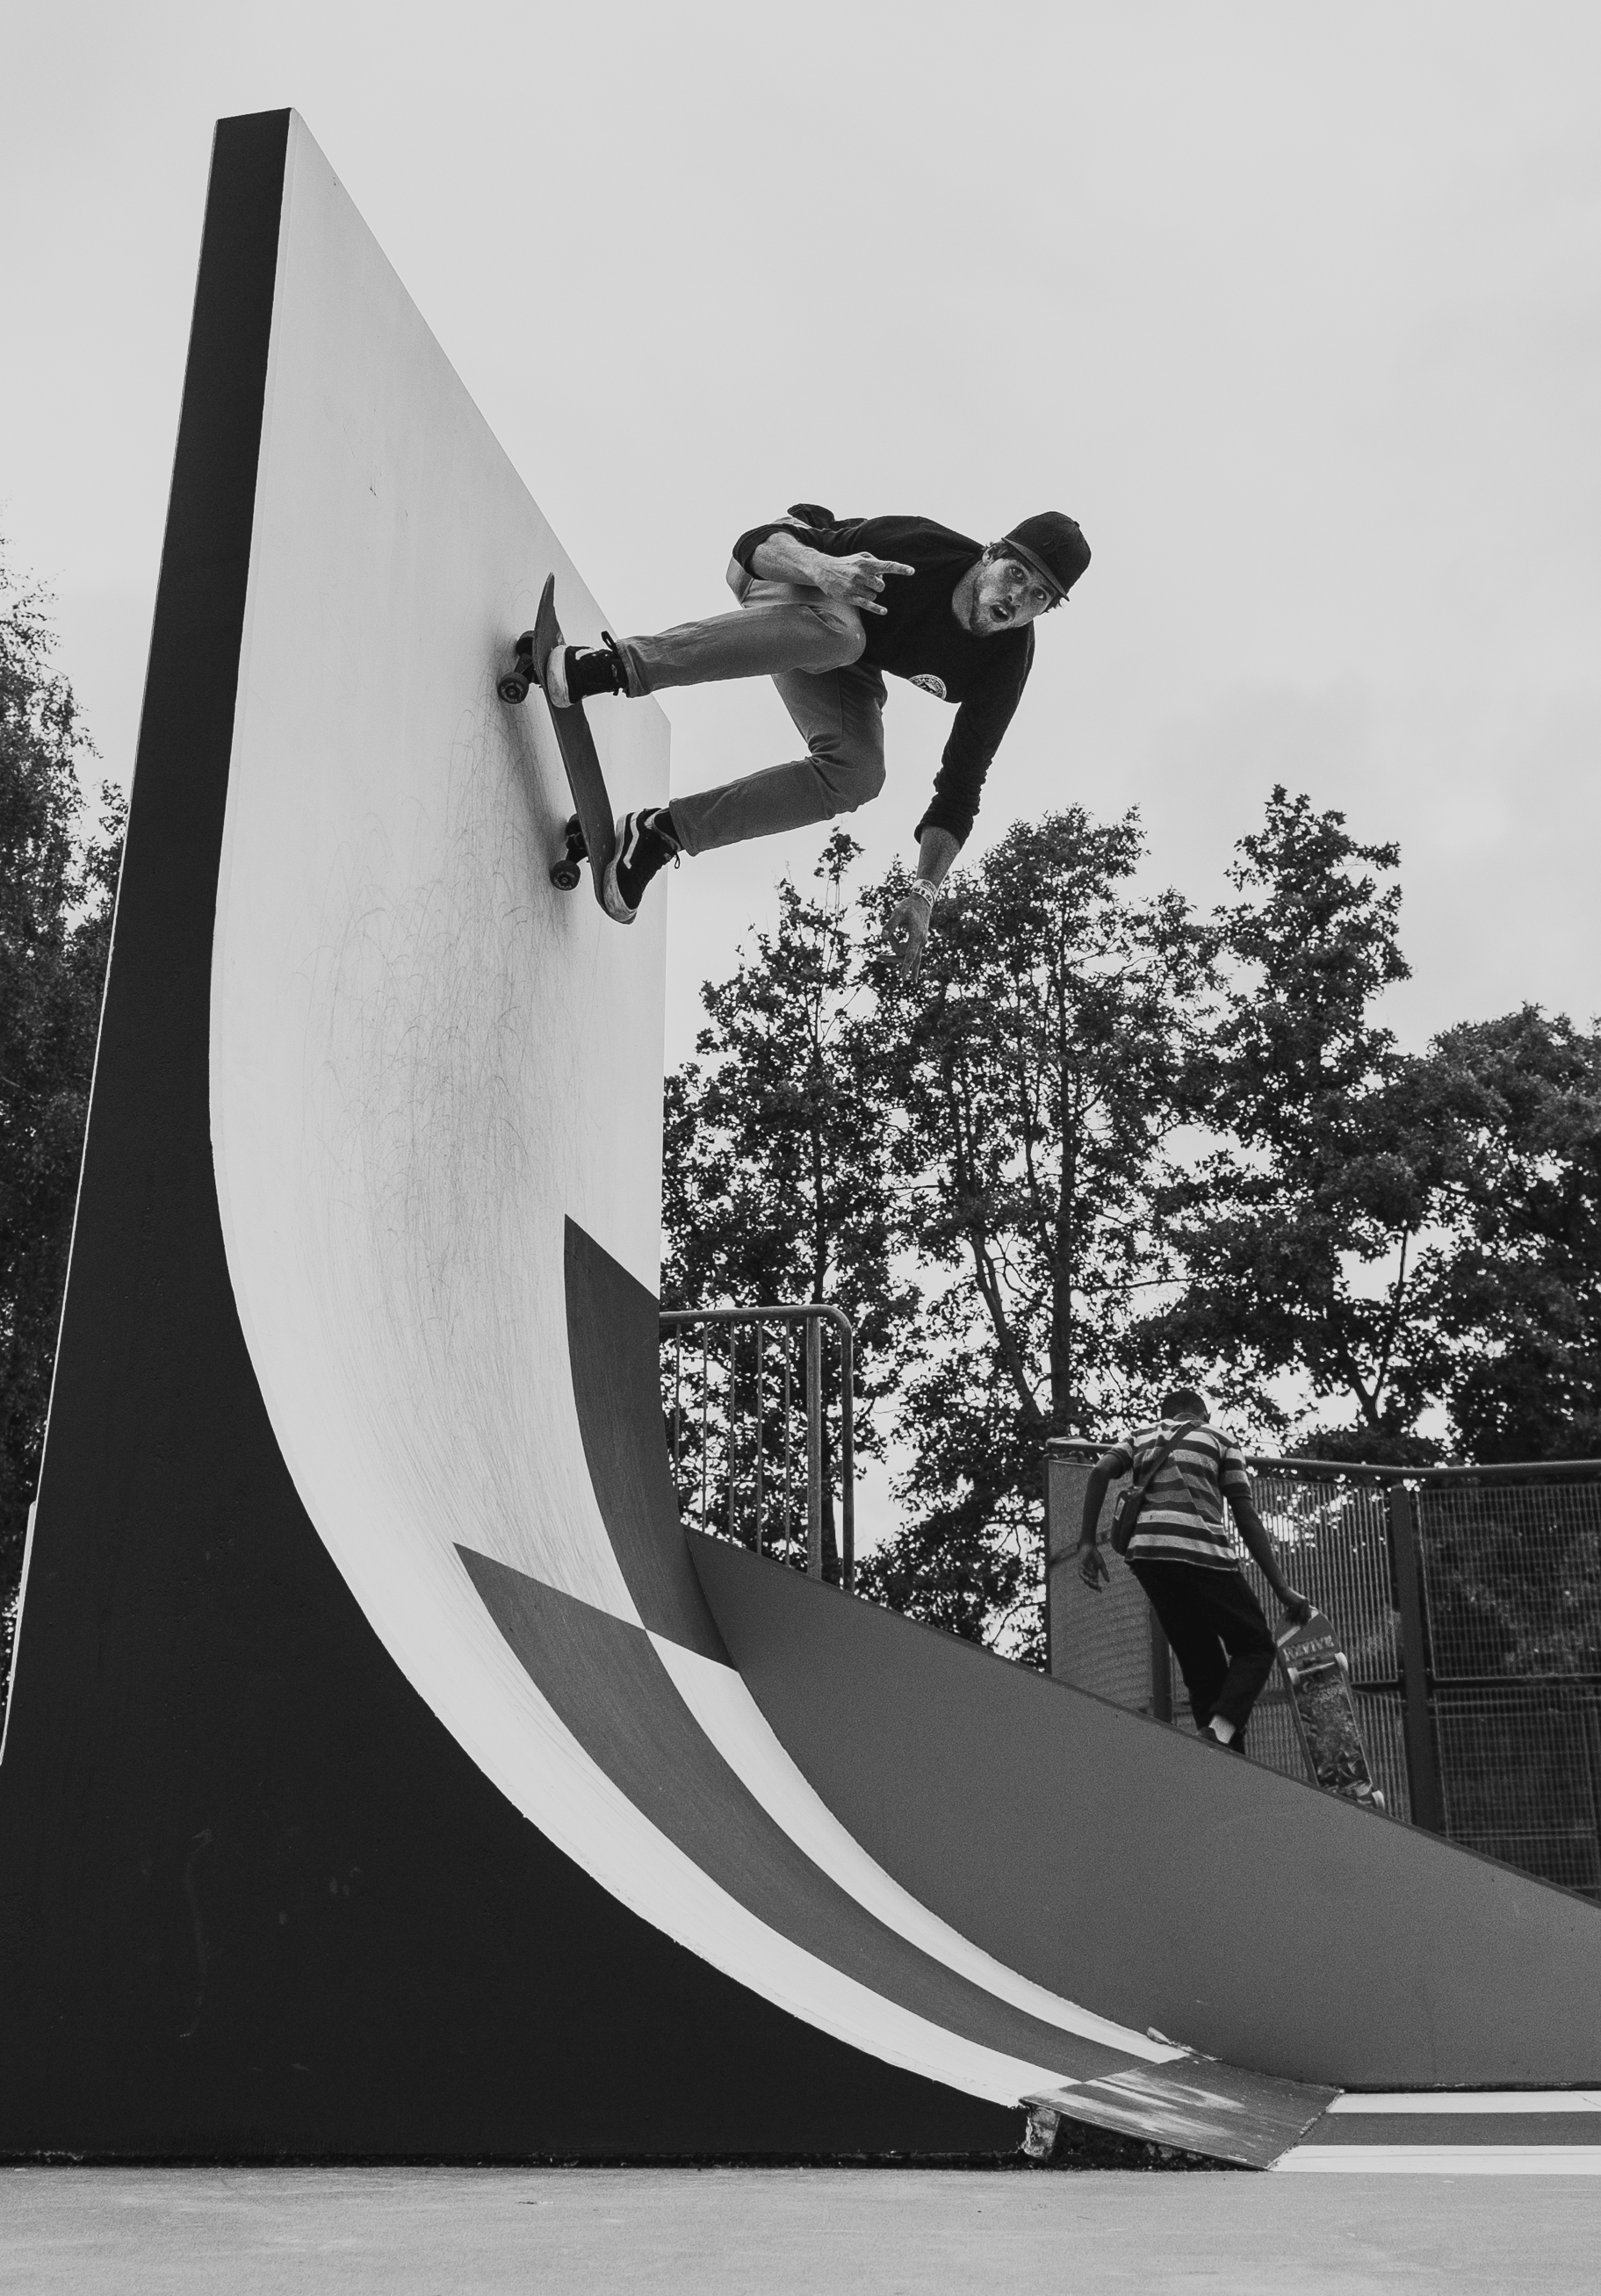 Wallride by Frederik Bronckers at Skatepark Lot Photo by Stoked